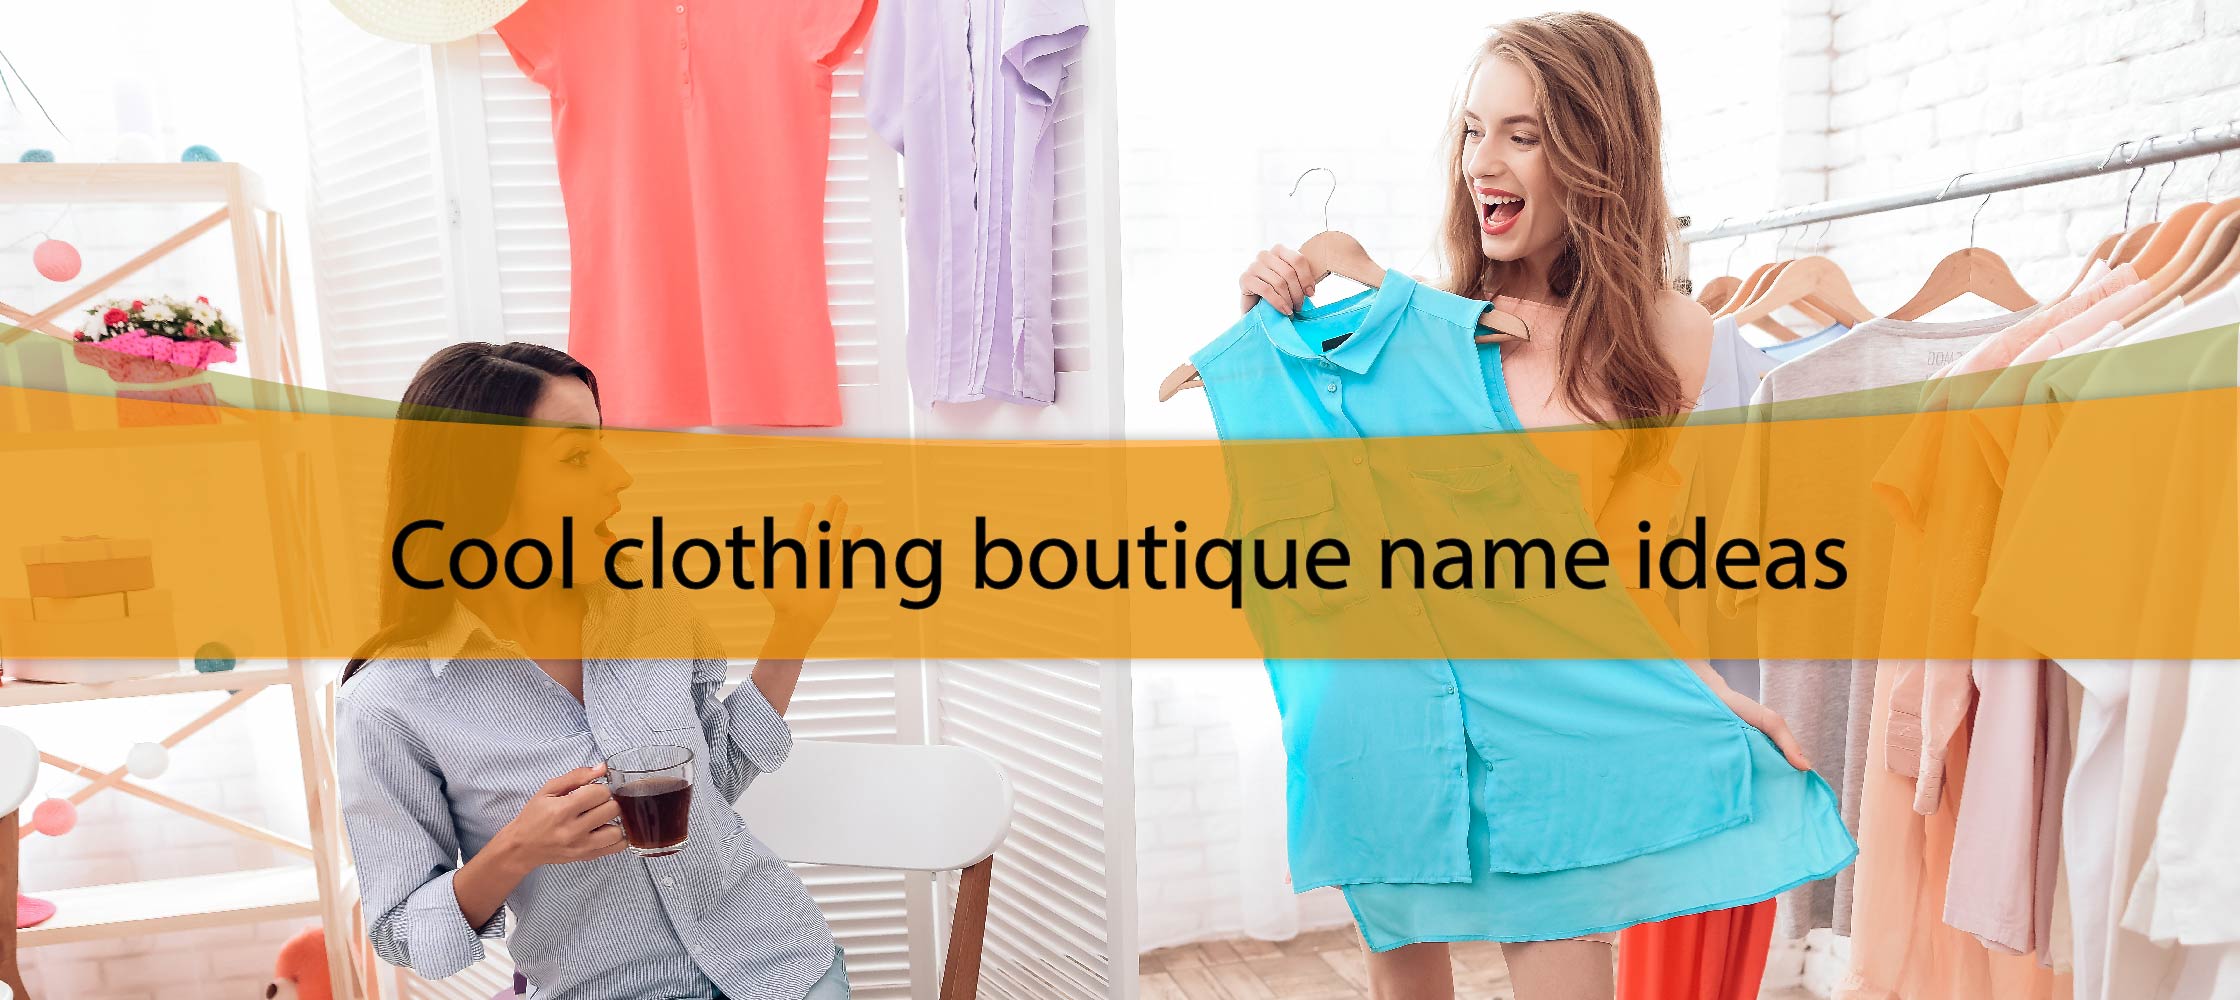 Cool clothing boutique name ideas